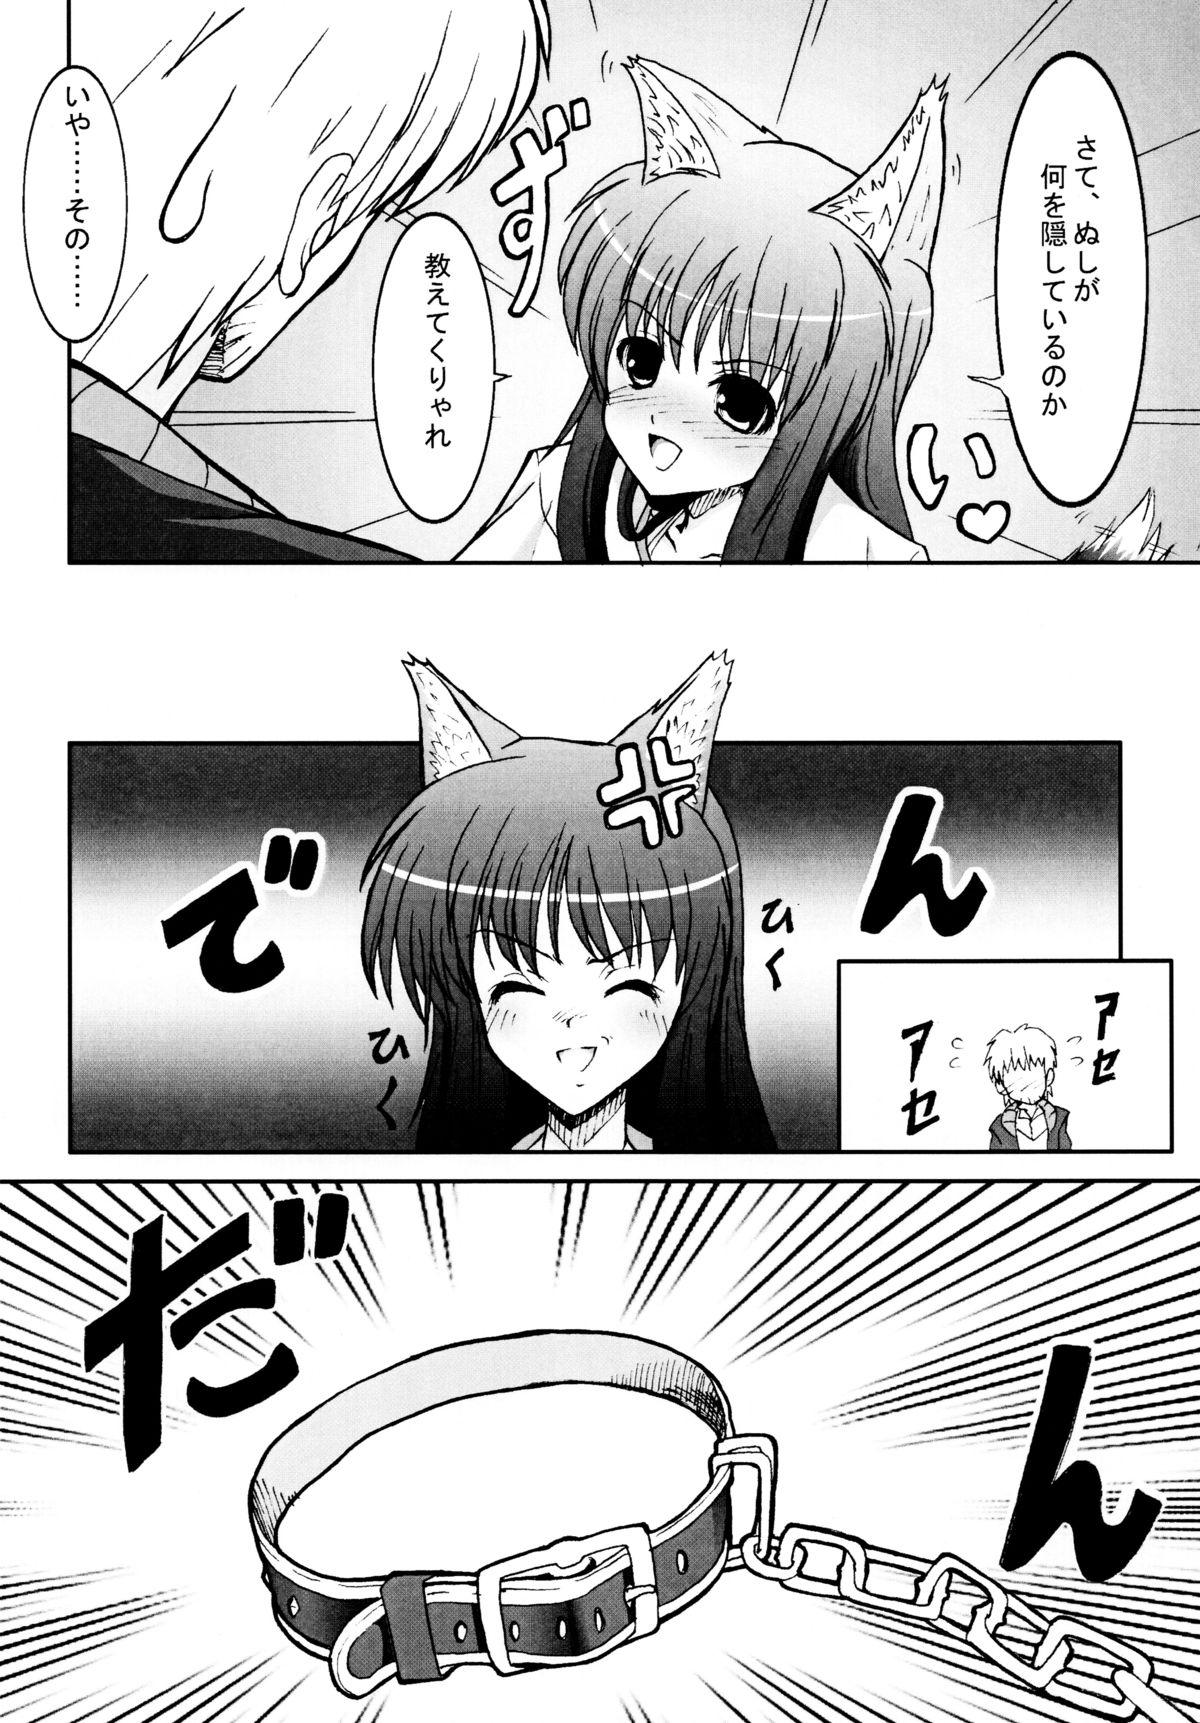 Nena Ookami to Ai no Kusari - Spice and wolf Gay College - Page 6